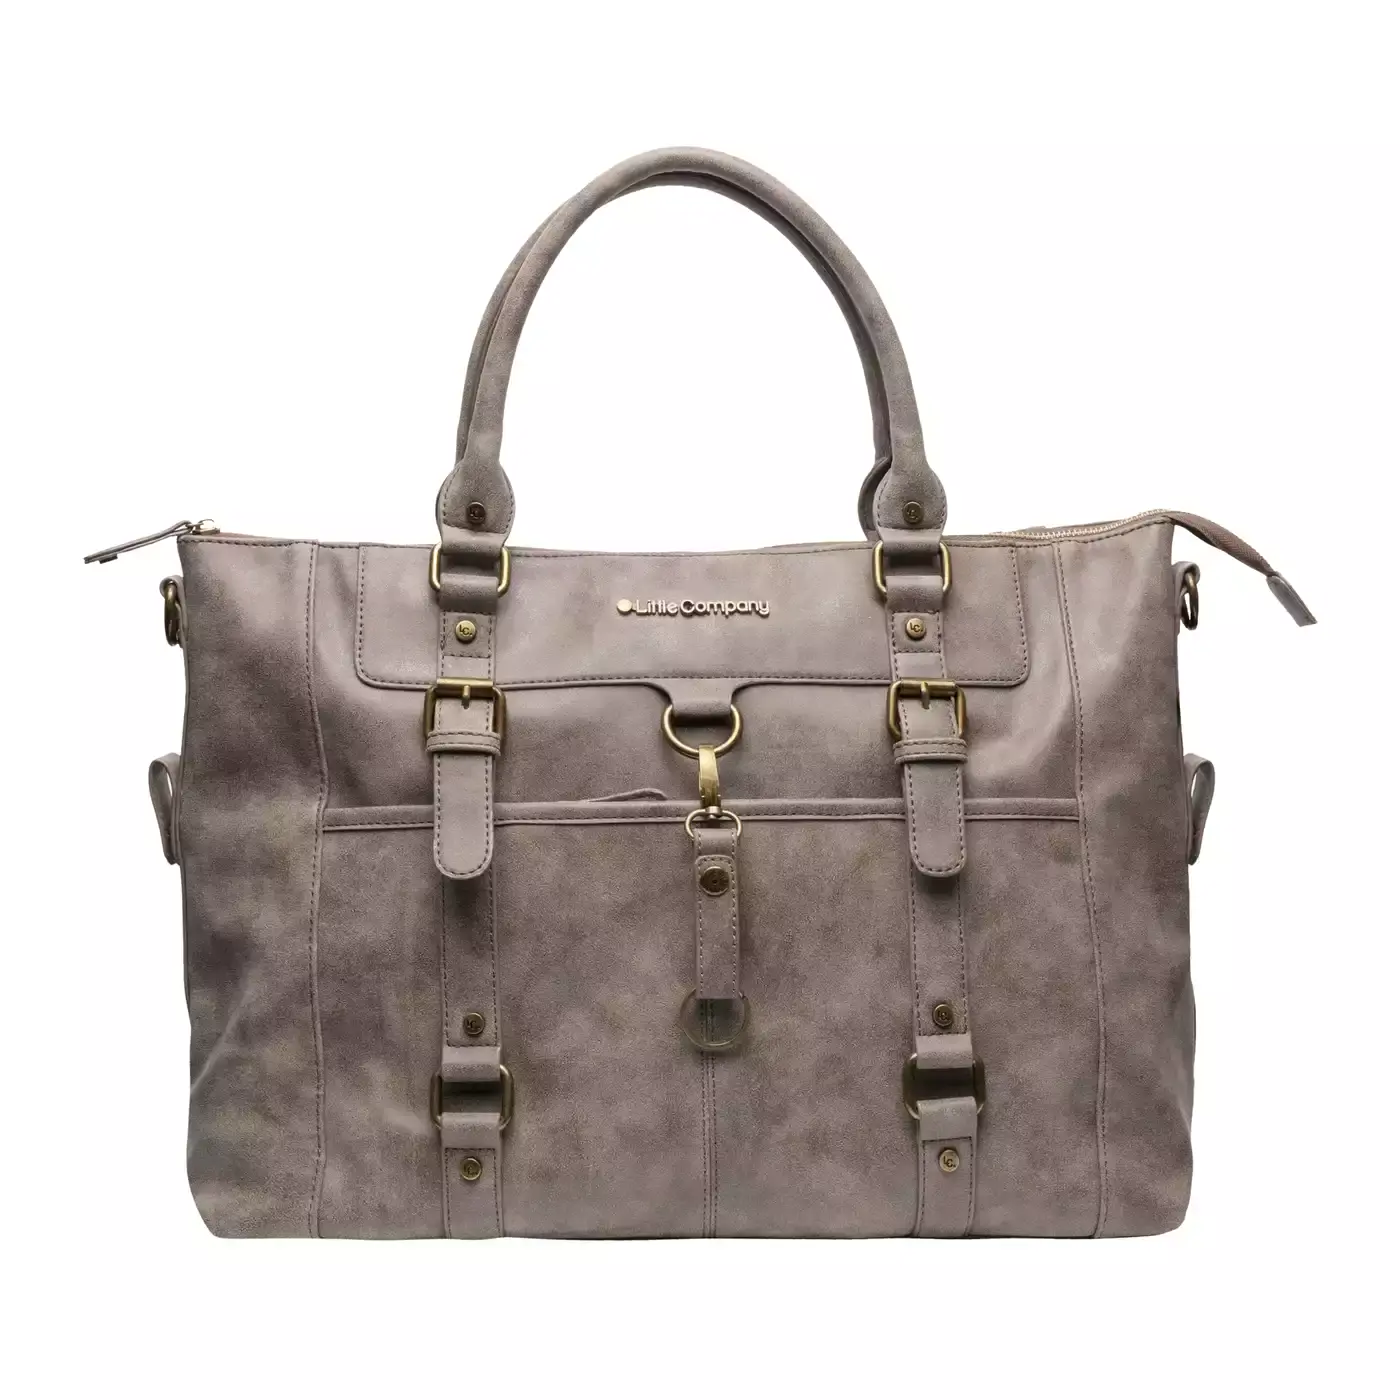 Wickeltasche Helsinki solid taupe Little Company Beige Taupe 2000576181309 1